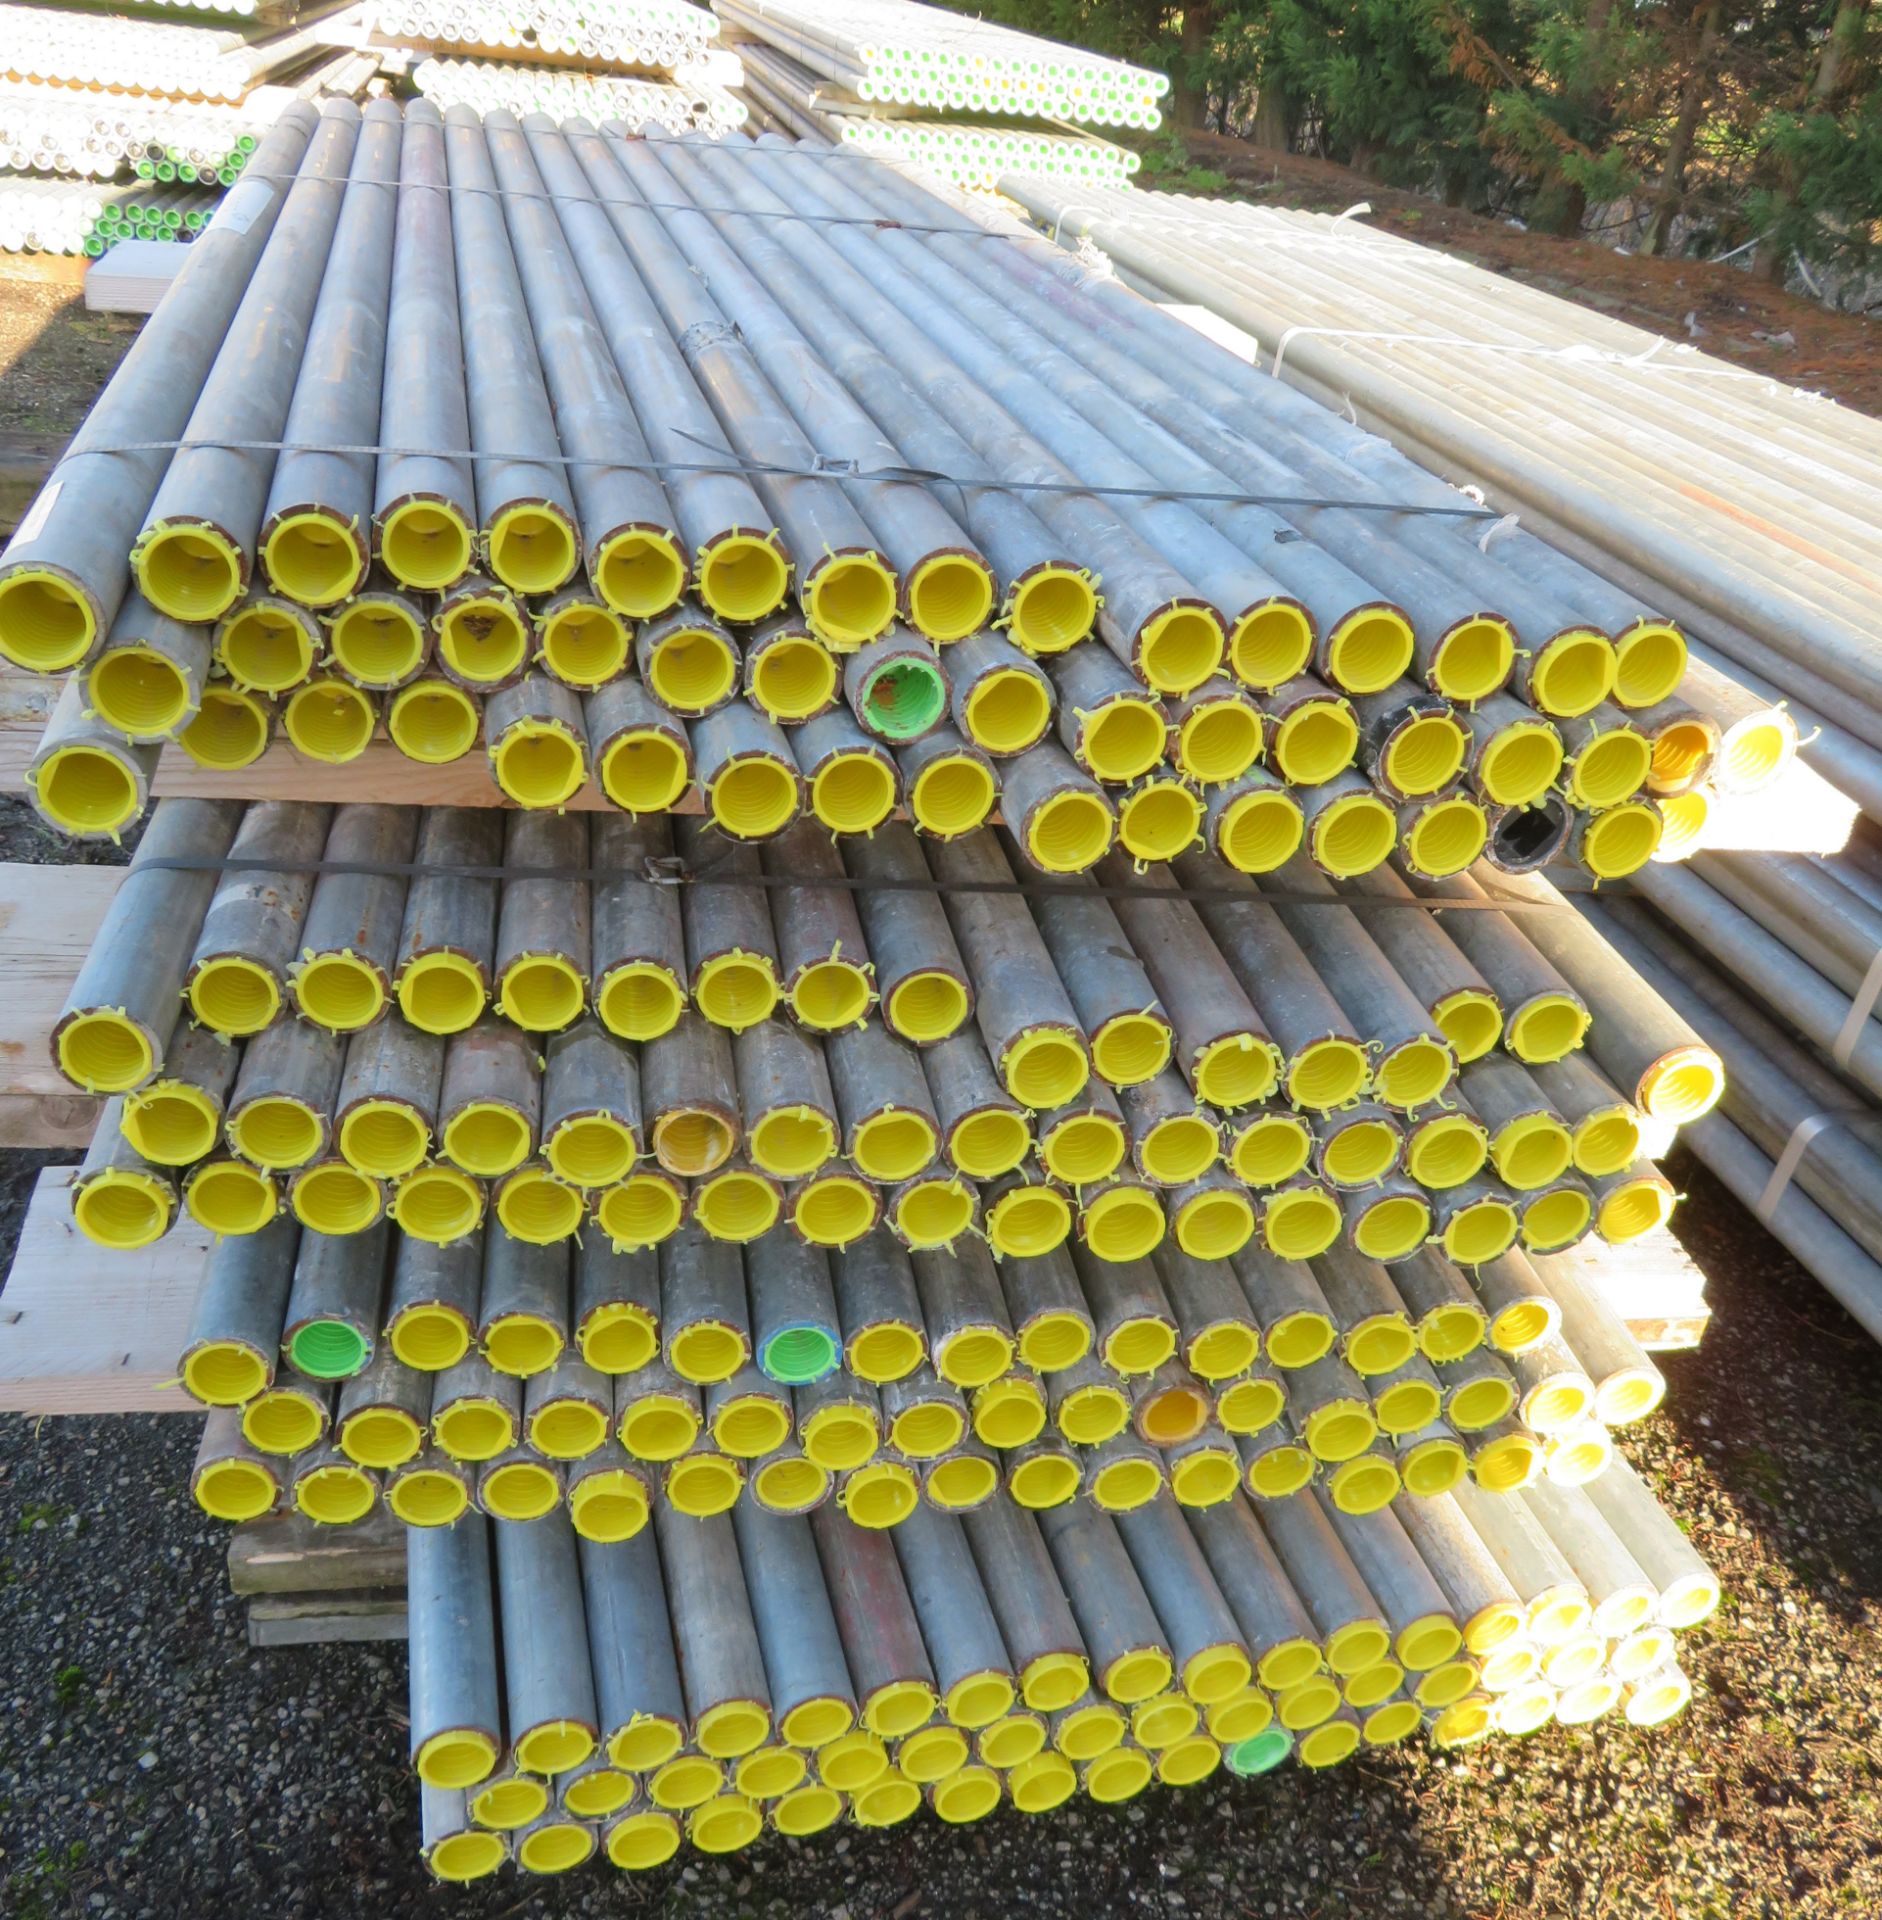 200x 6ft Galvanised Steel Scaffolding Poles 48mm Diameter x 4mm Thick. - Image 3 of 4